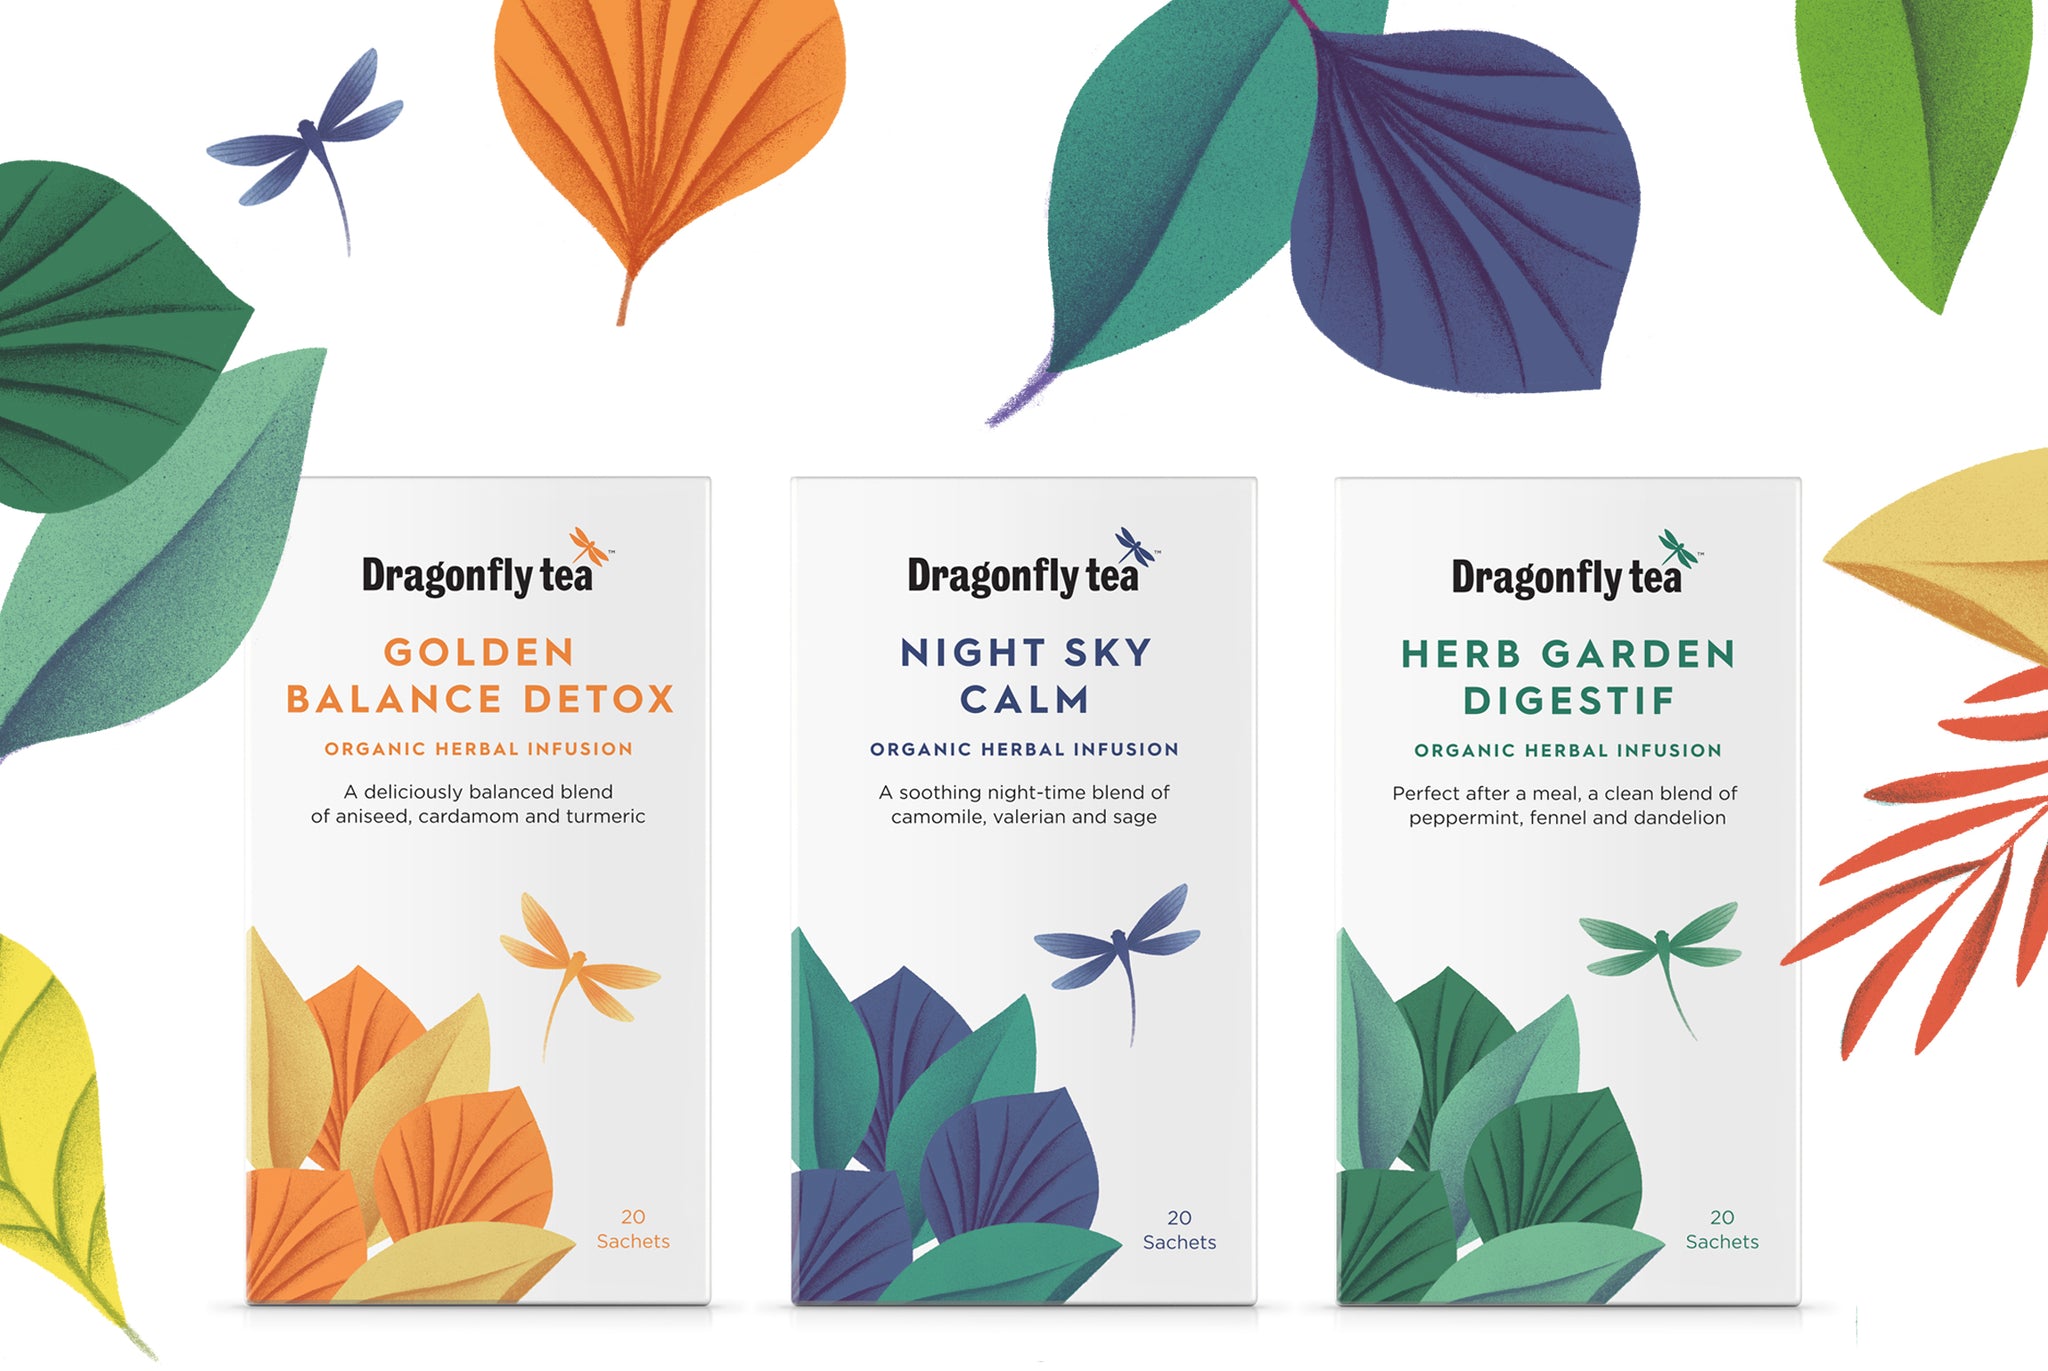 New delicious Dragonfly herbal tea infusions